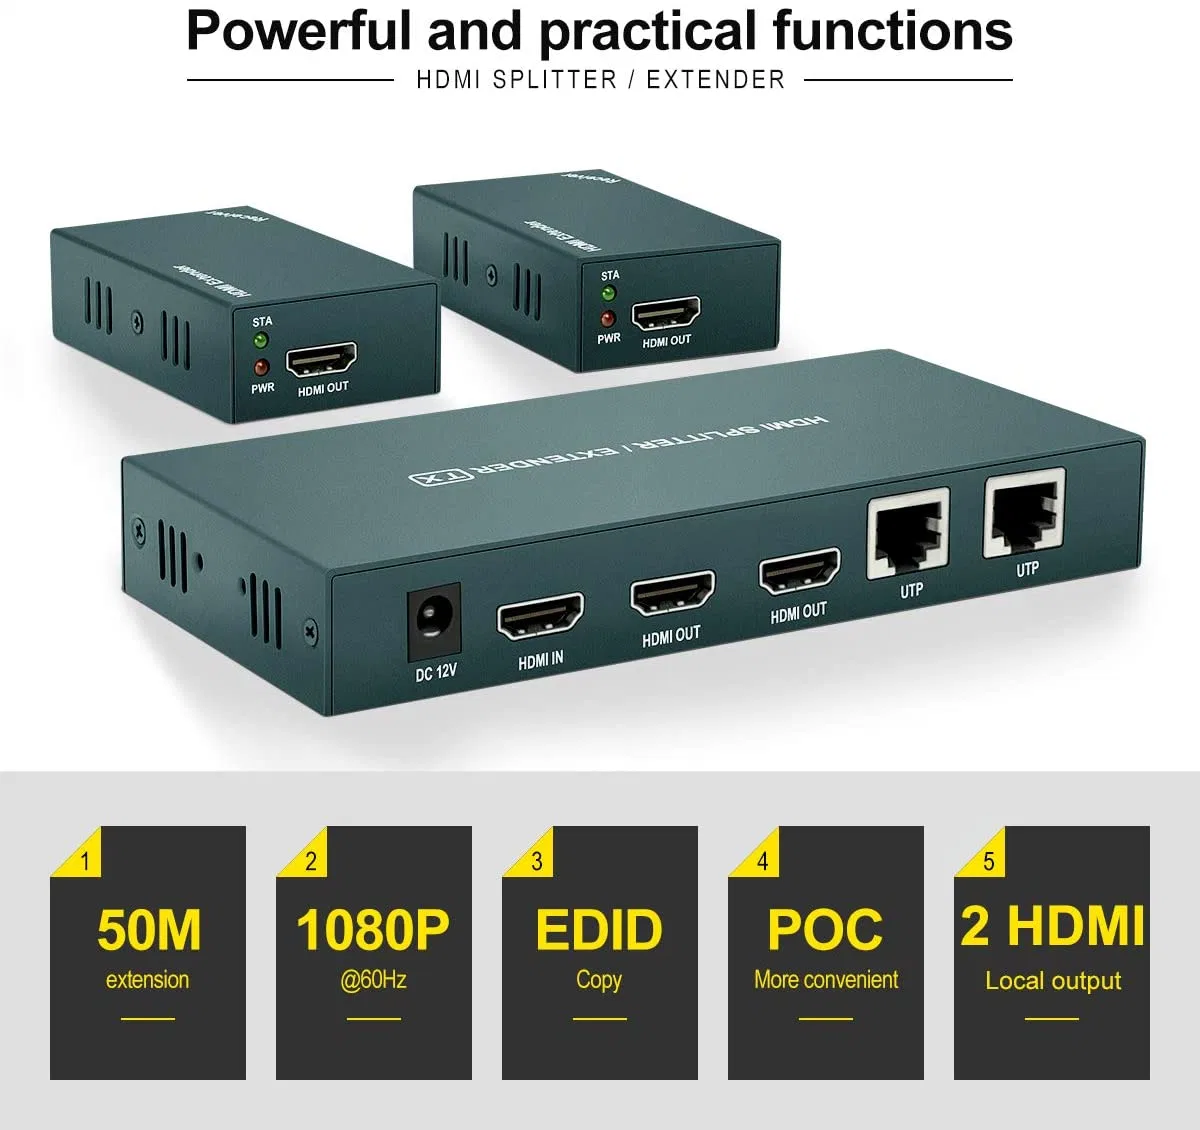 High Definition HDMI Extender Splitter 1X2, Full HD 1080P@60Hz & 3D Visual, Extend up to 165FT (50m) Over Cat5e/CAT6/Cat7 Cable, Dual Channel Transmission